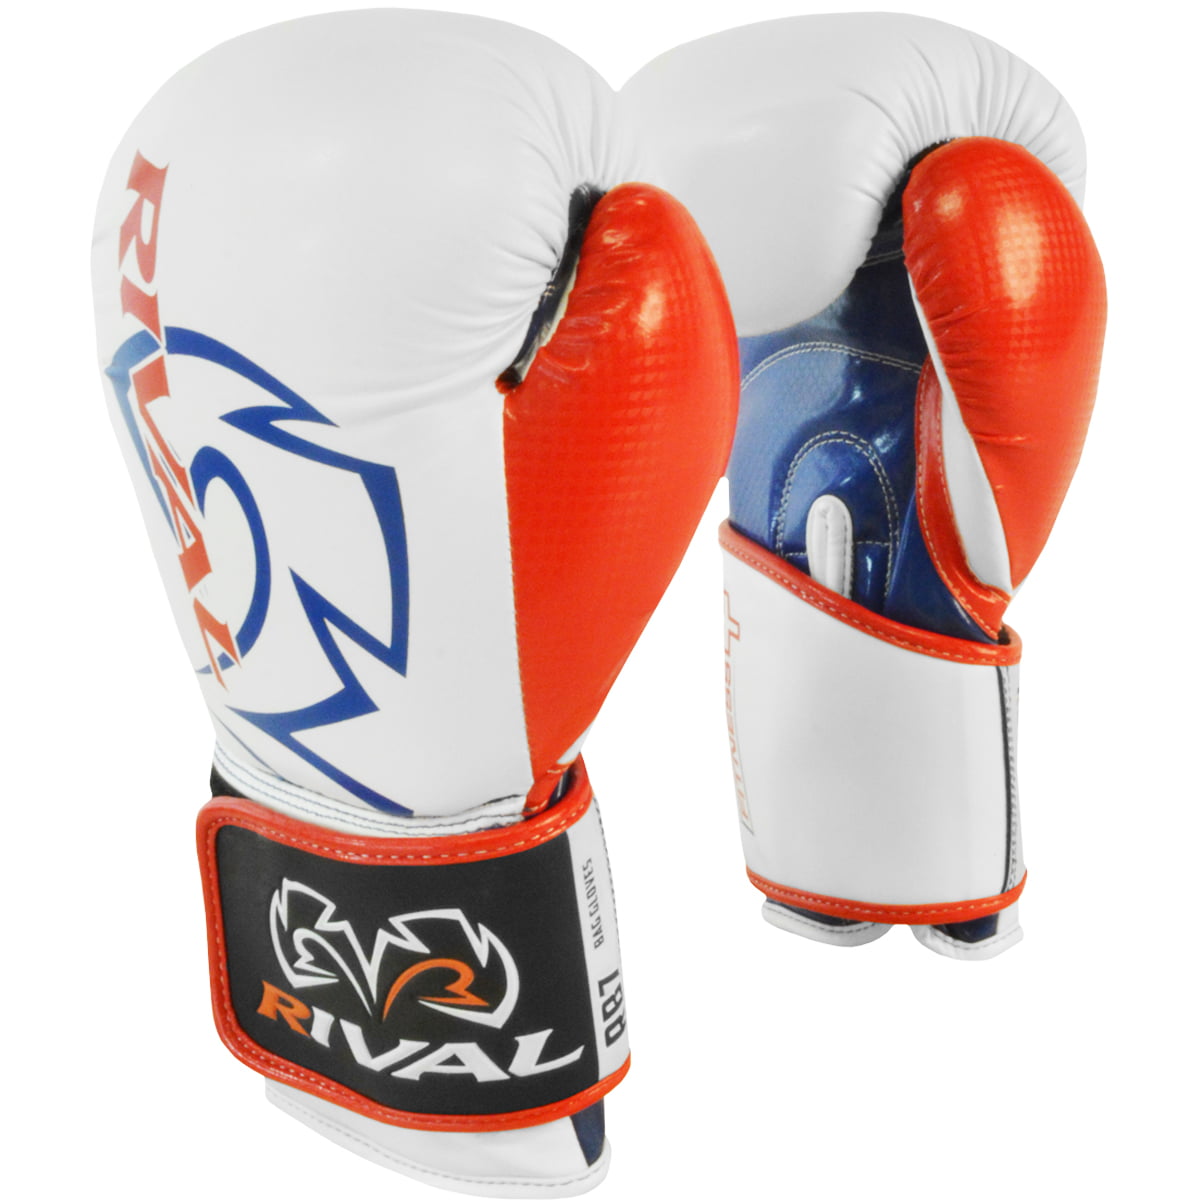 Rival Boxing Bag Gloves RB7 training Fitness White Red Blue 